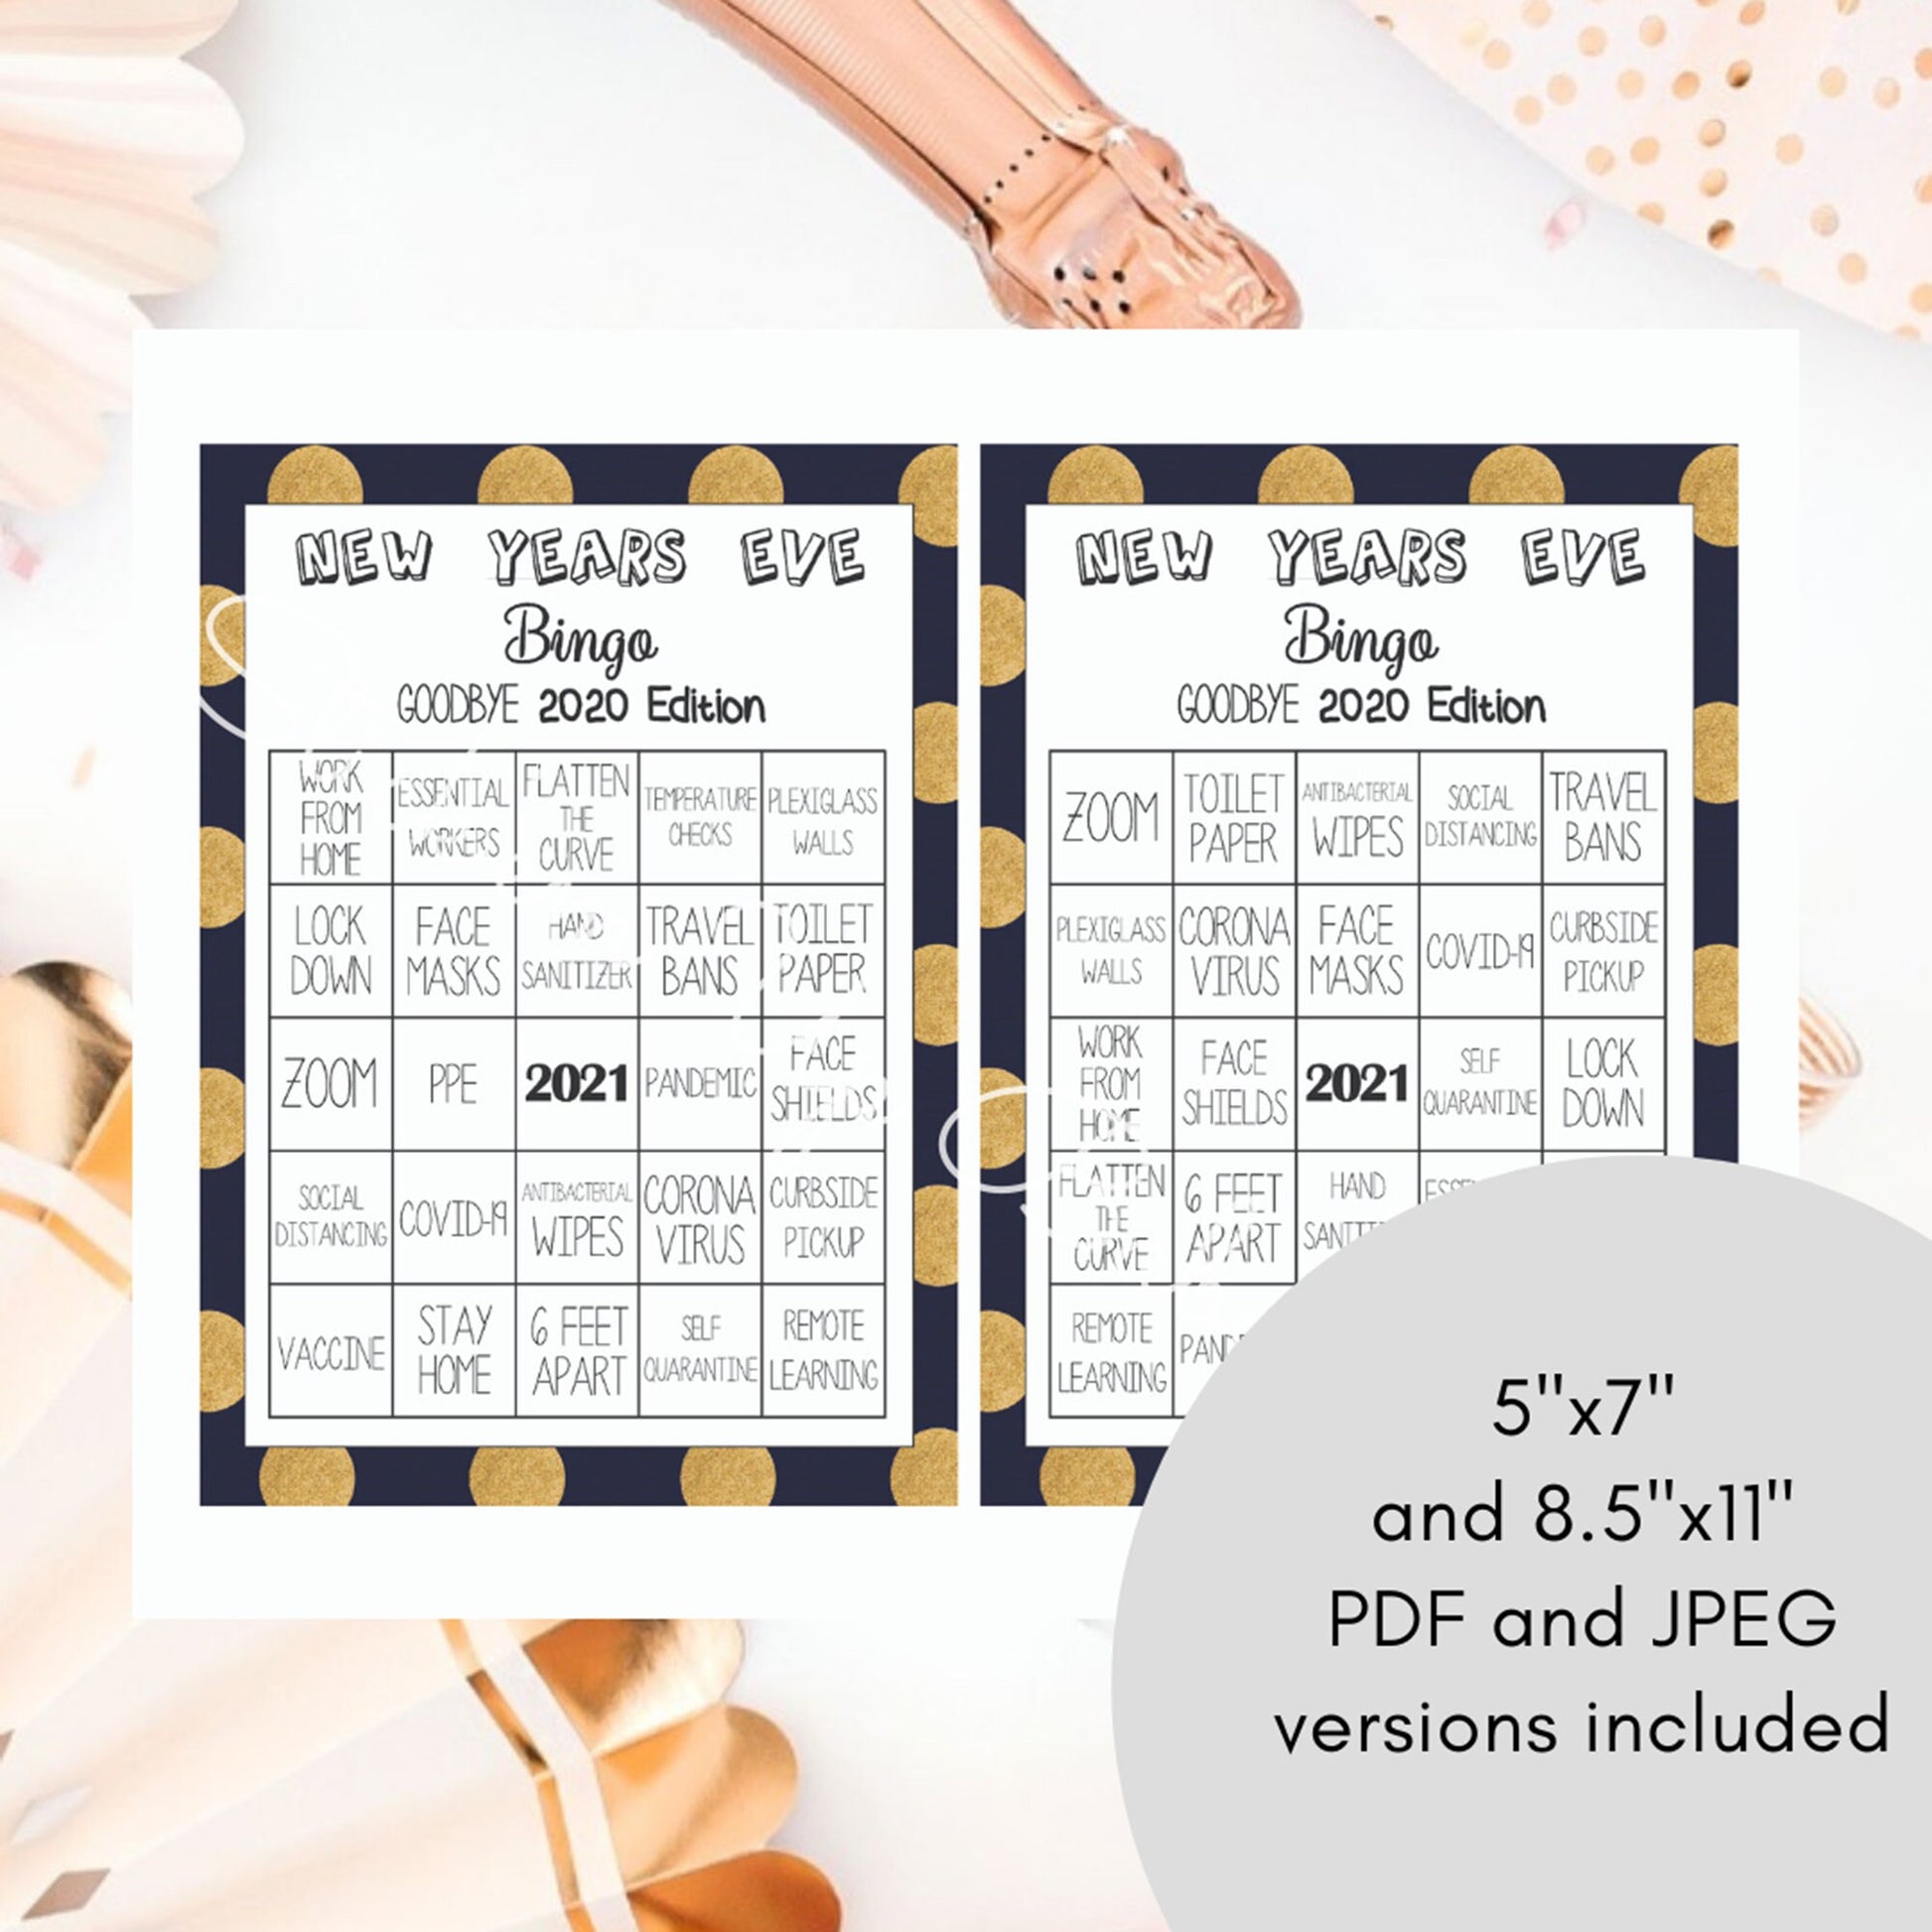 New Years Eve Decor - Family Games - Zoom - New Years Eve Games - 2020 Party Game - New Years Bingo 2020 - Funny Bingo Game - Bingo Game - Stick'em Up Baby®